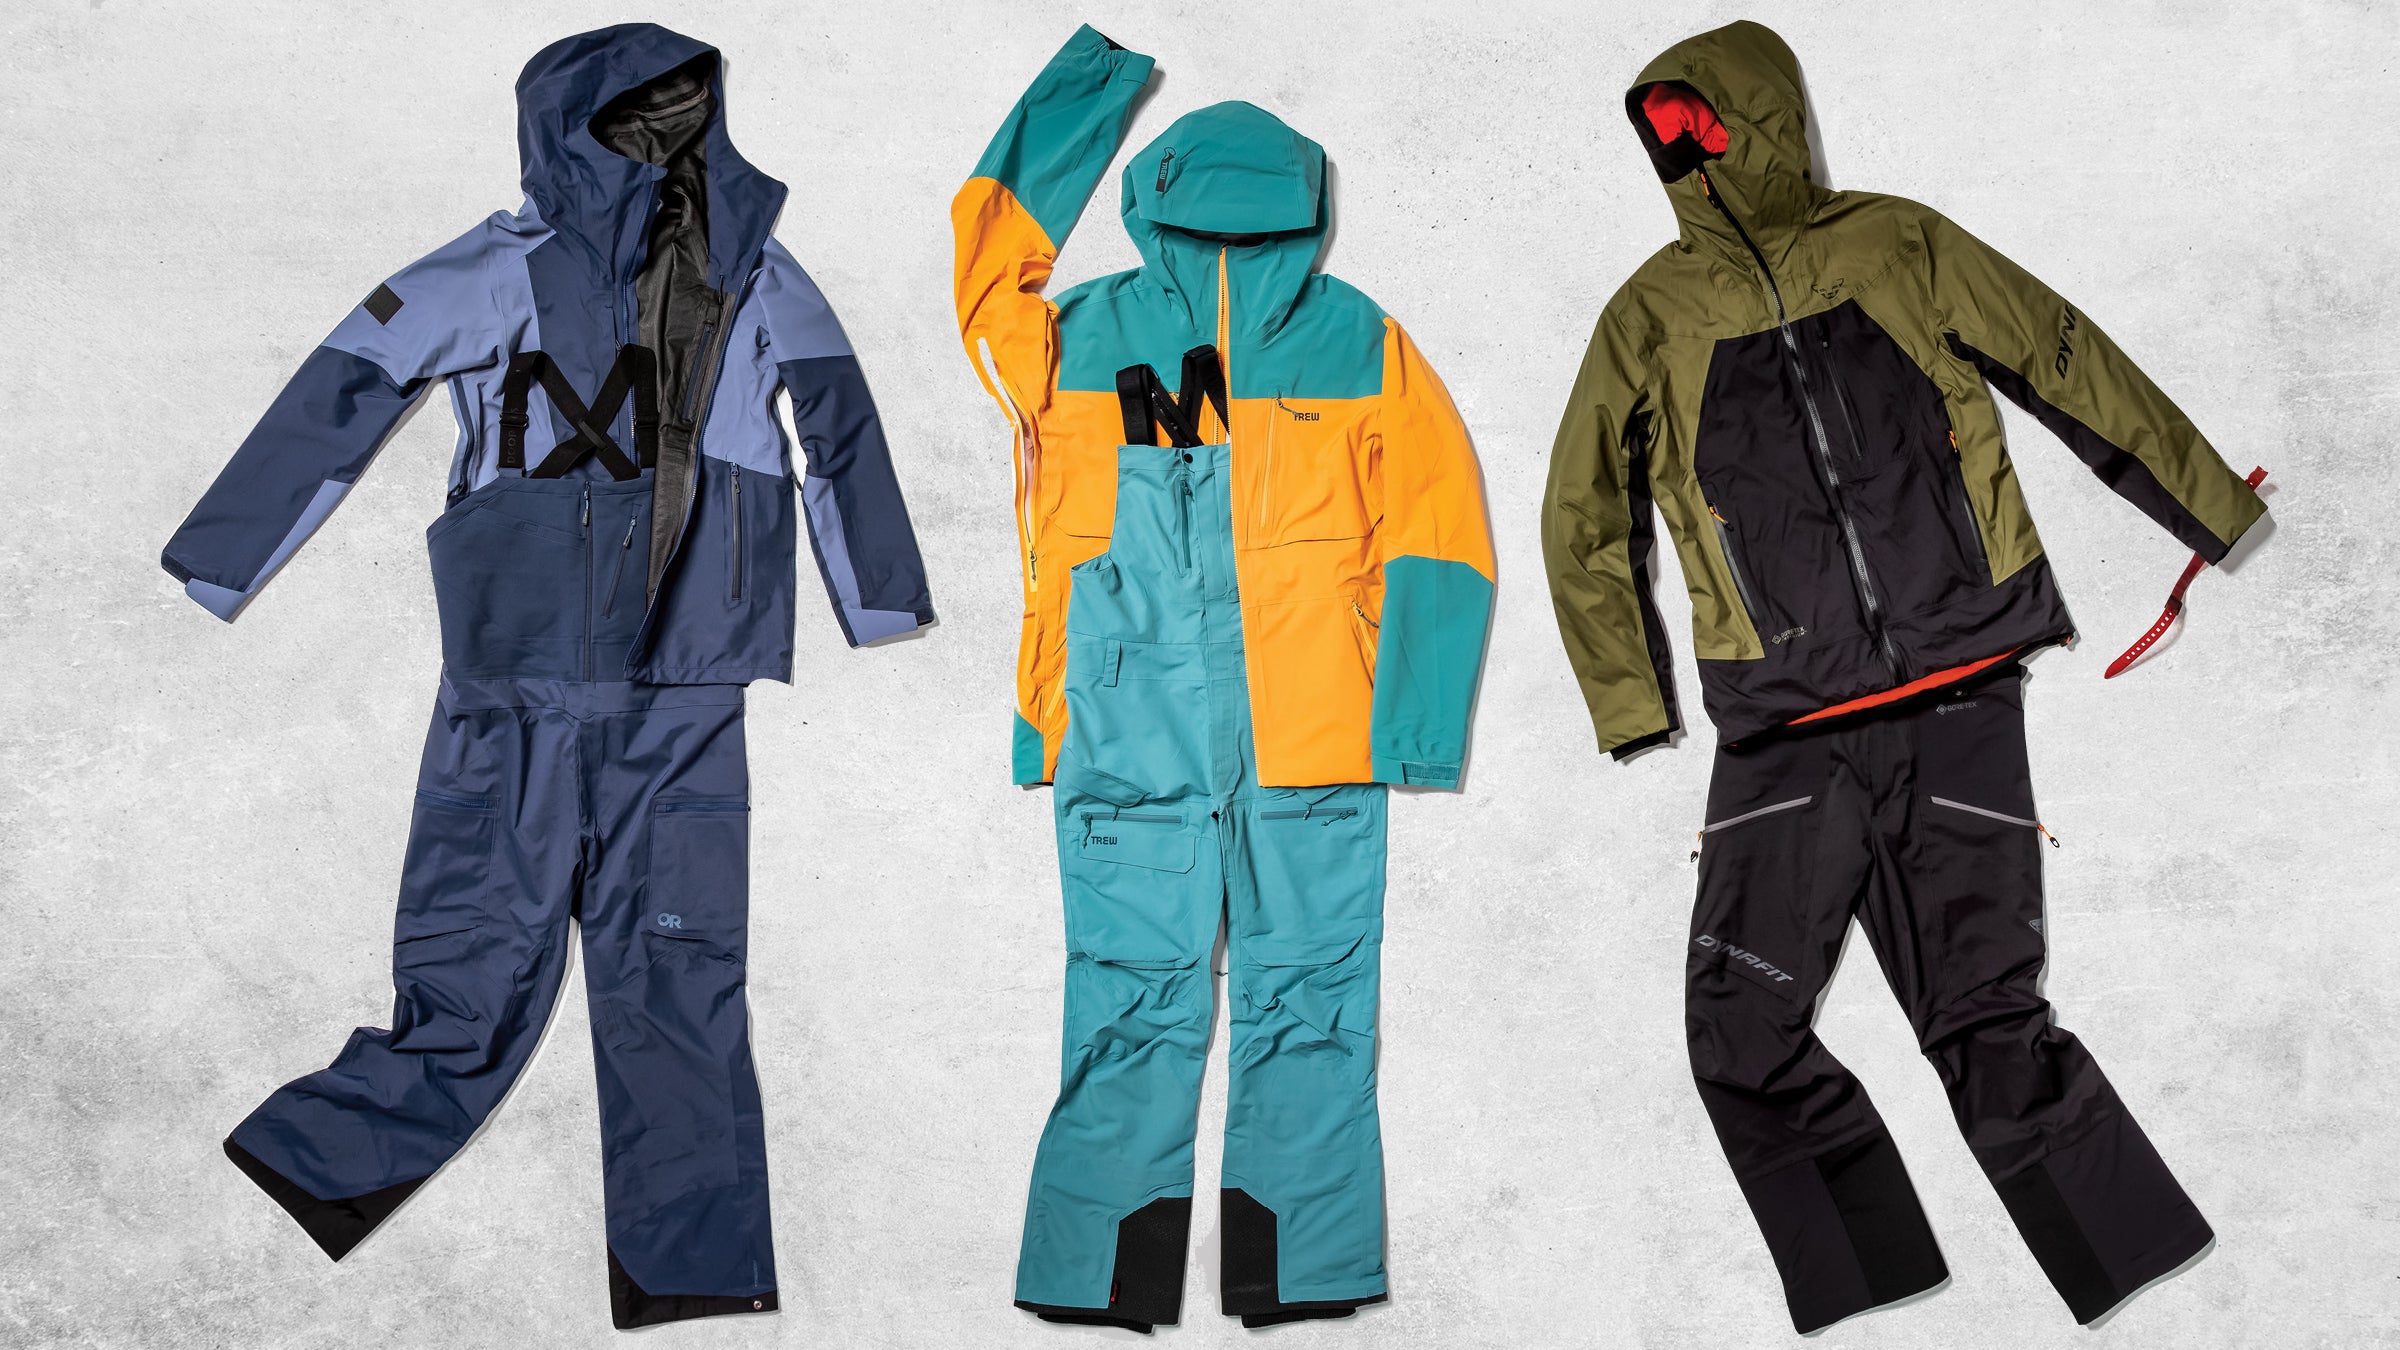 Must Have Ski Gear And Après Ski Roundup